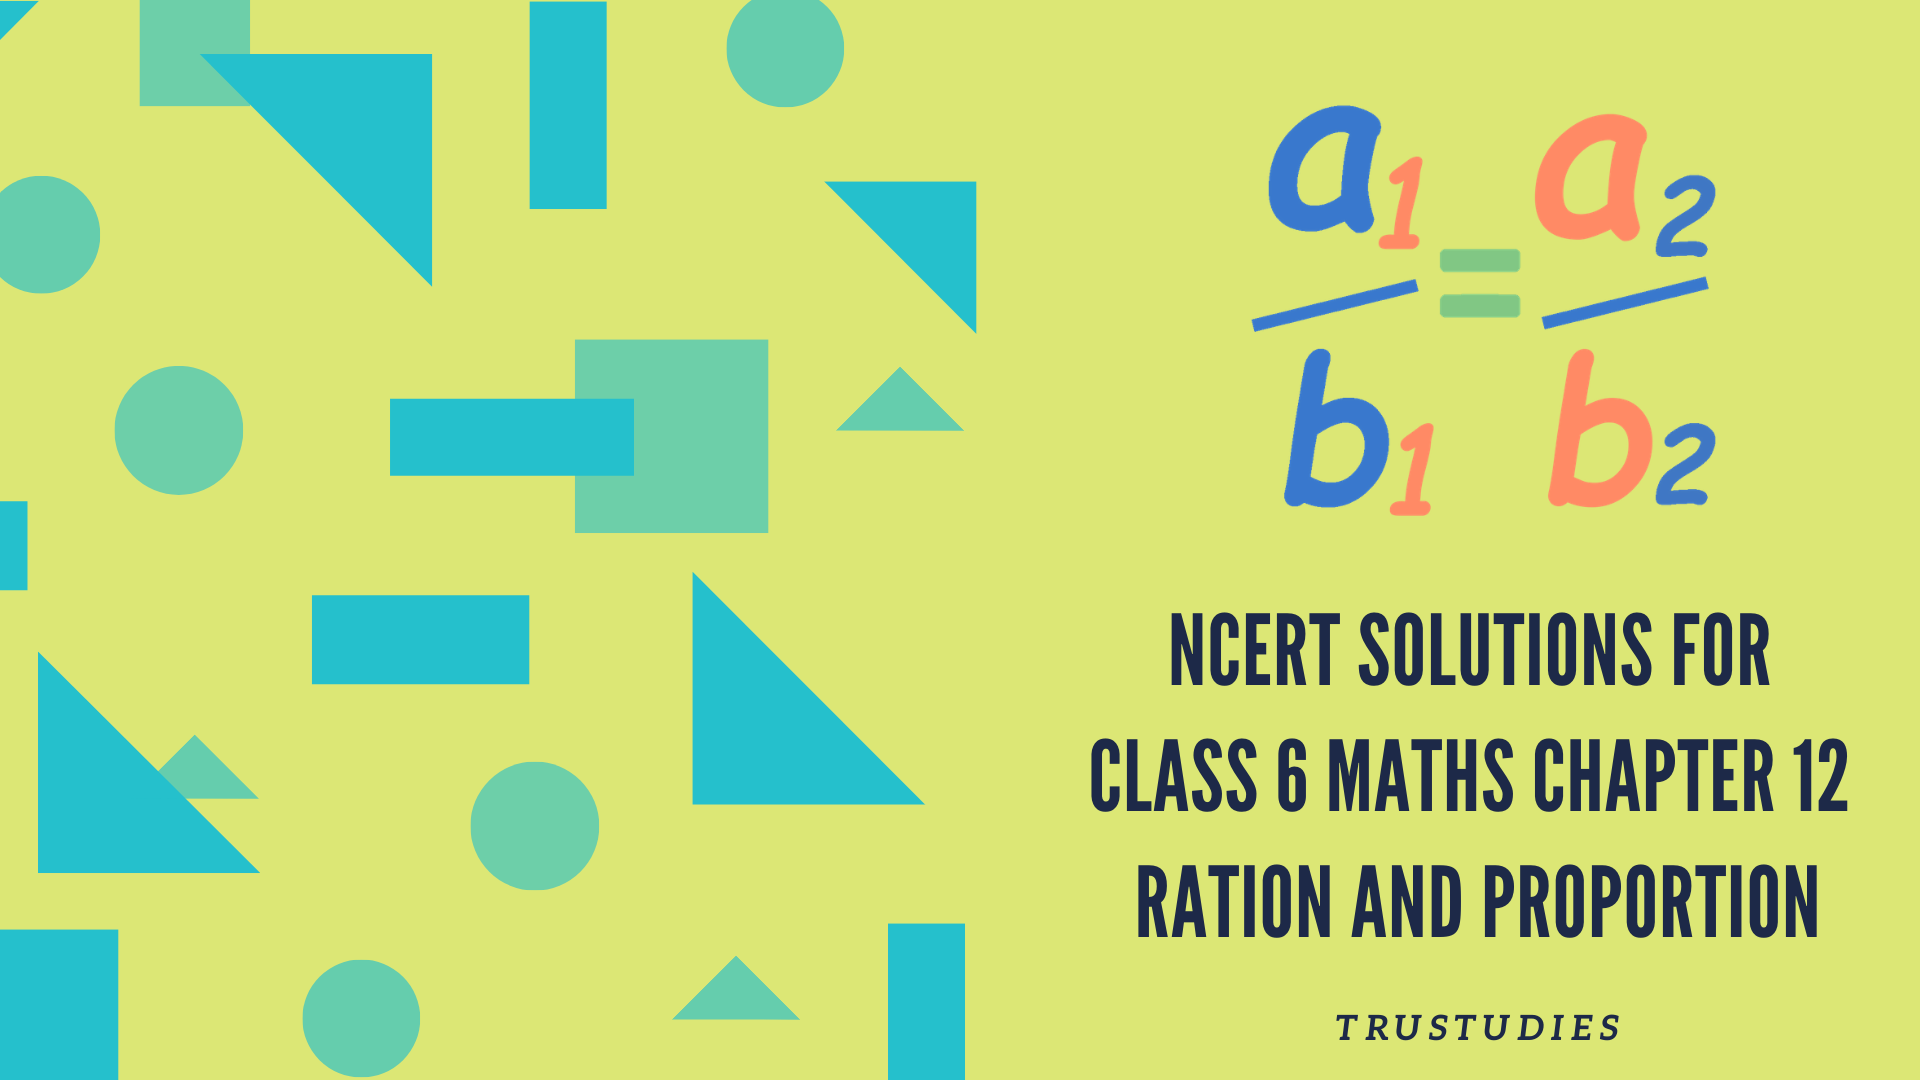 NCERT solutions for class 6 maths chapter 12 ratio and proportion banner image